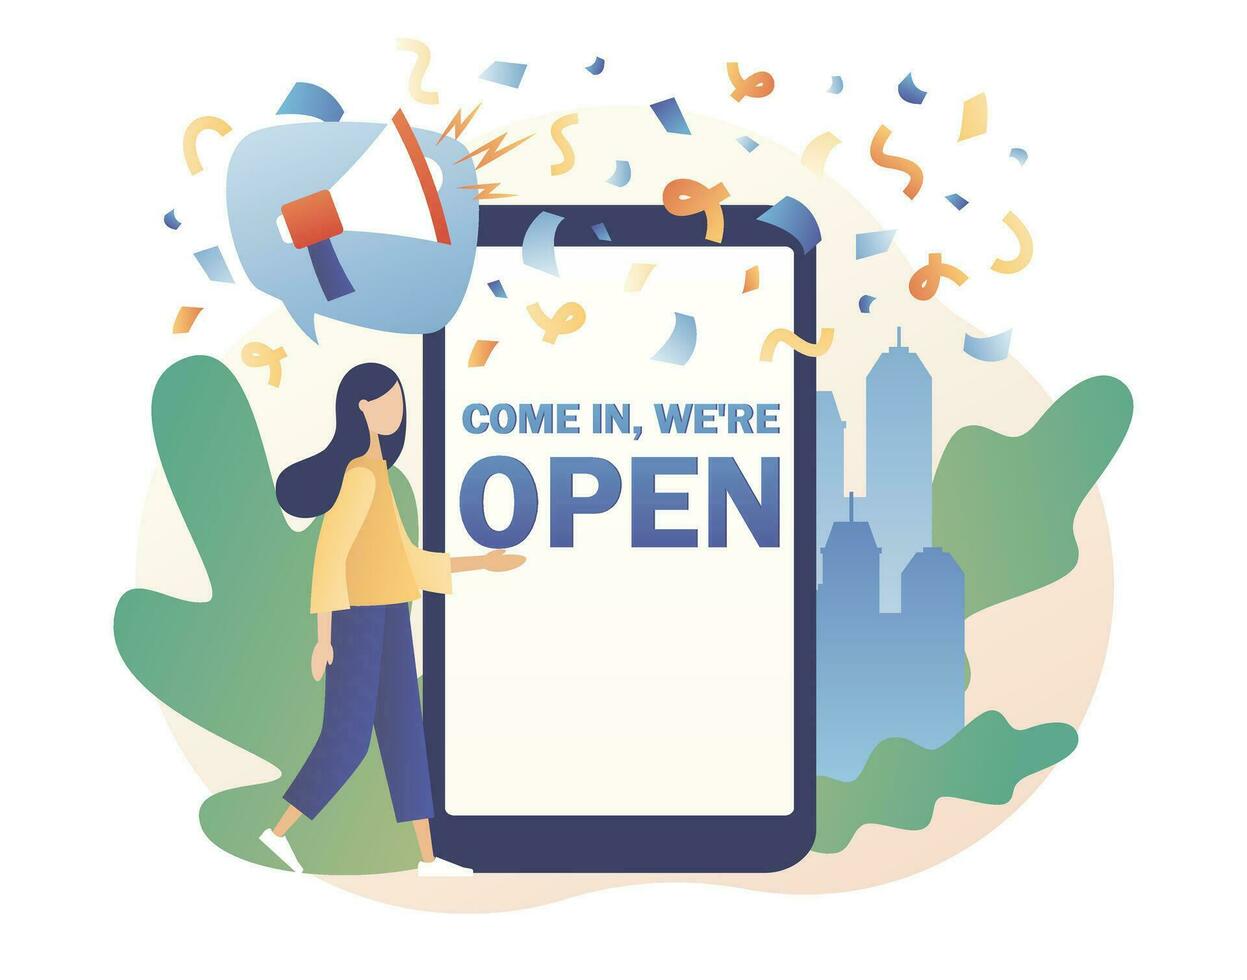 Come in we are Open - big text on smartphone screen. We are working again after quarantine. Reopening establishments, cafe, shop, store, salon. Modern flat cartoon style. Vector illustration